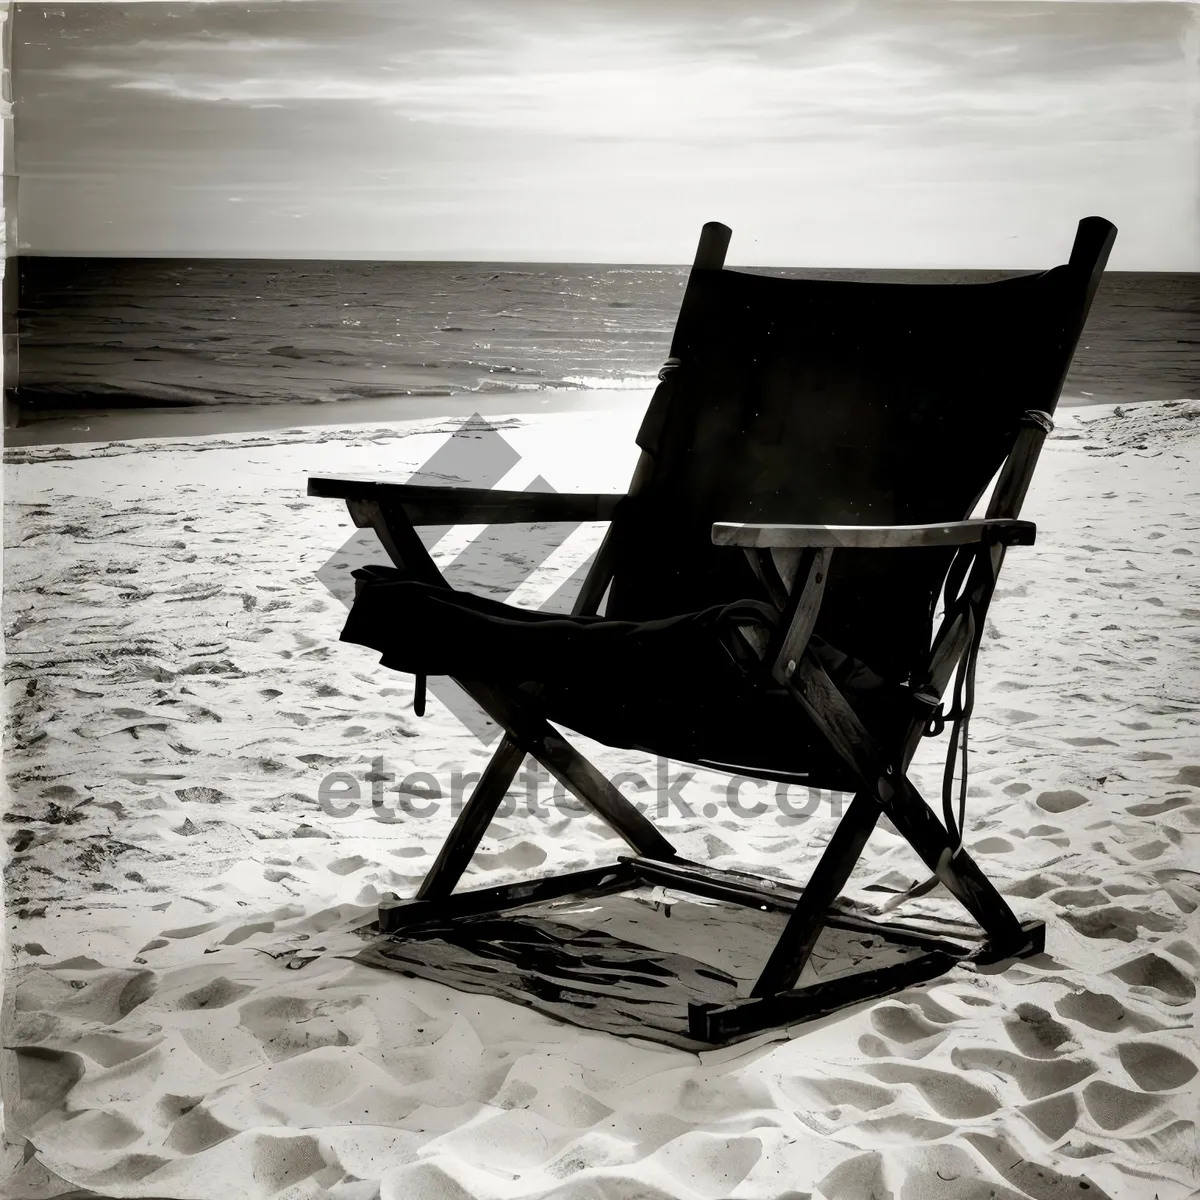 Picture of Relaxing Beach Chair by the Ocean